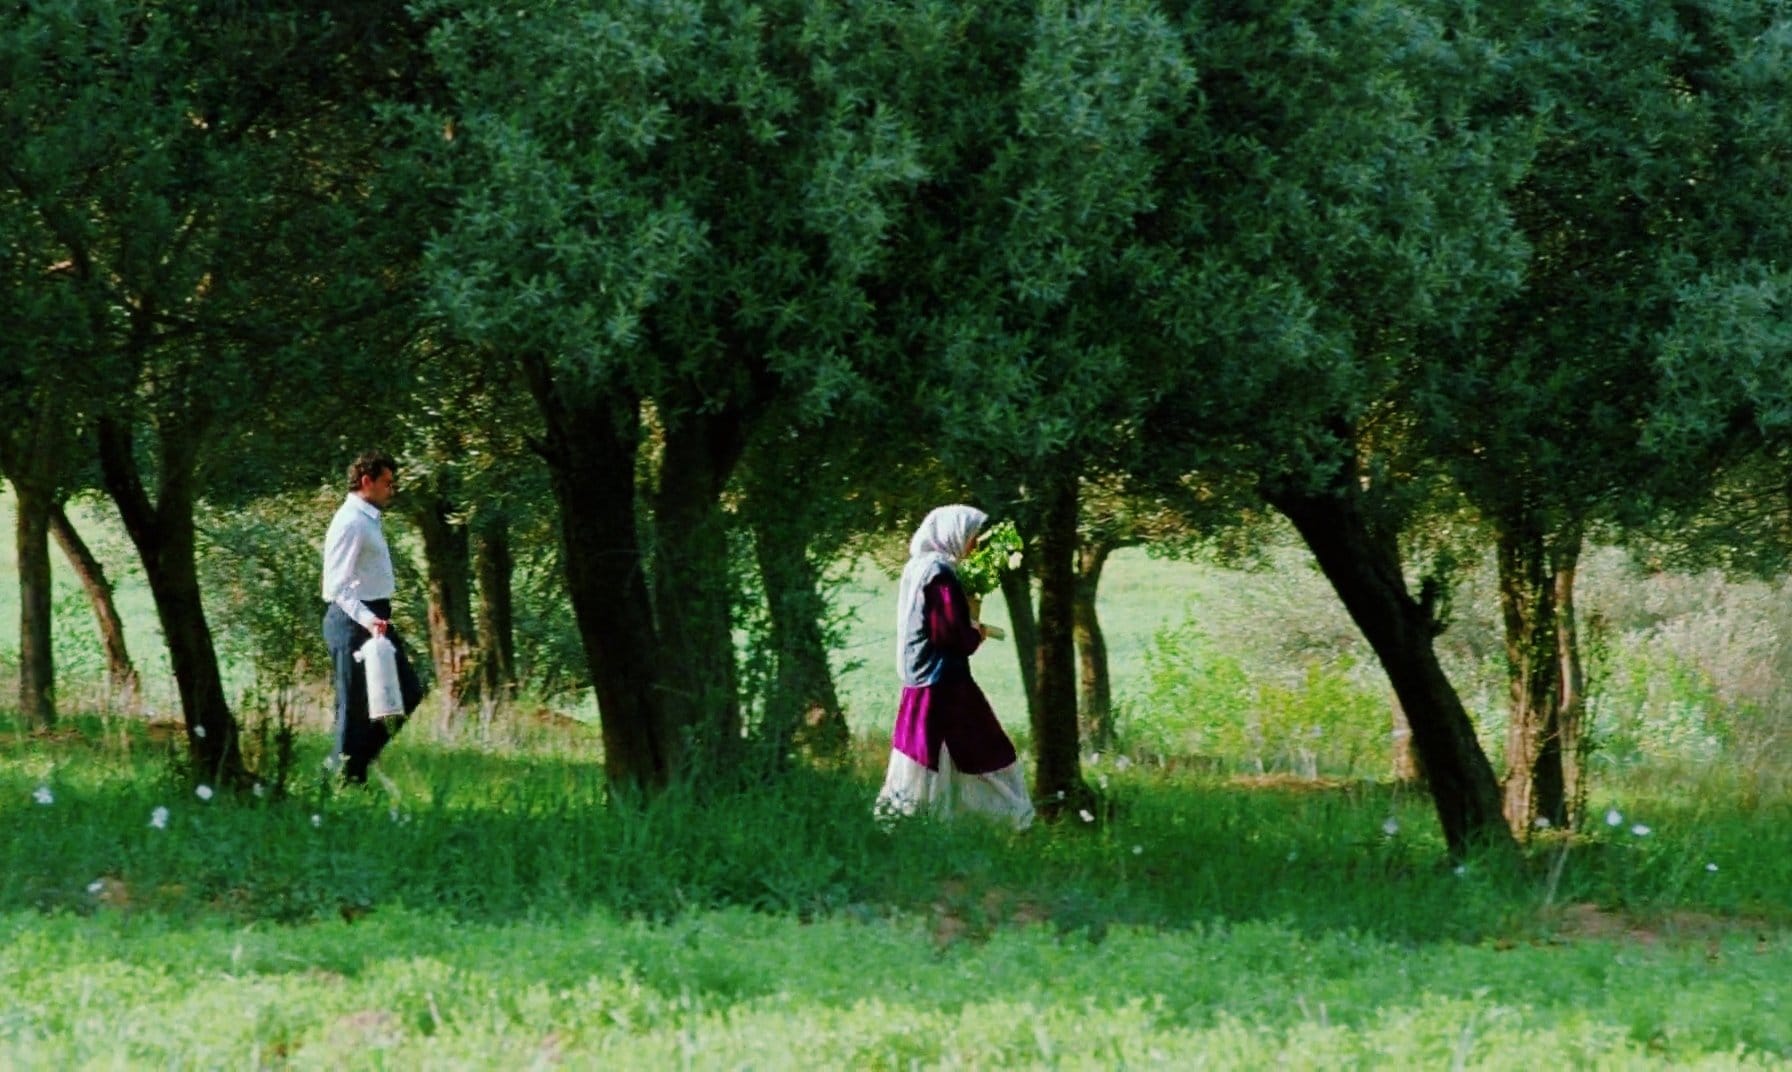 THROUGH THE OLIVE TREES